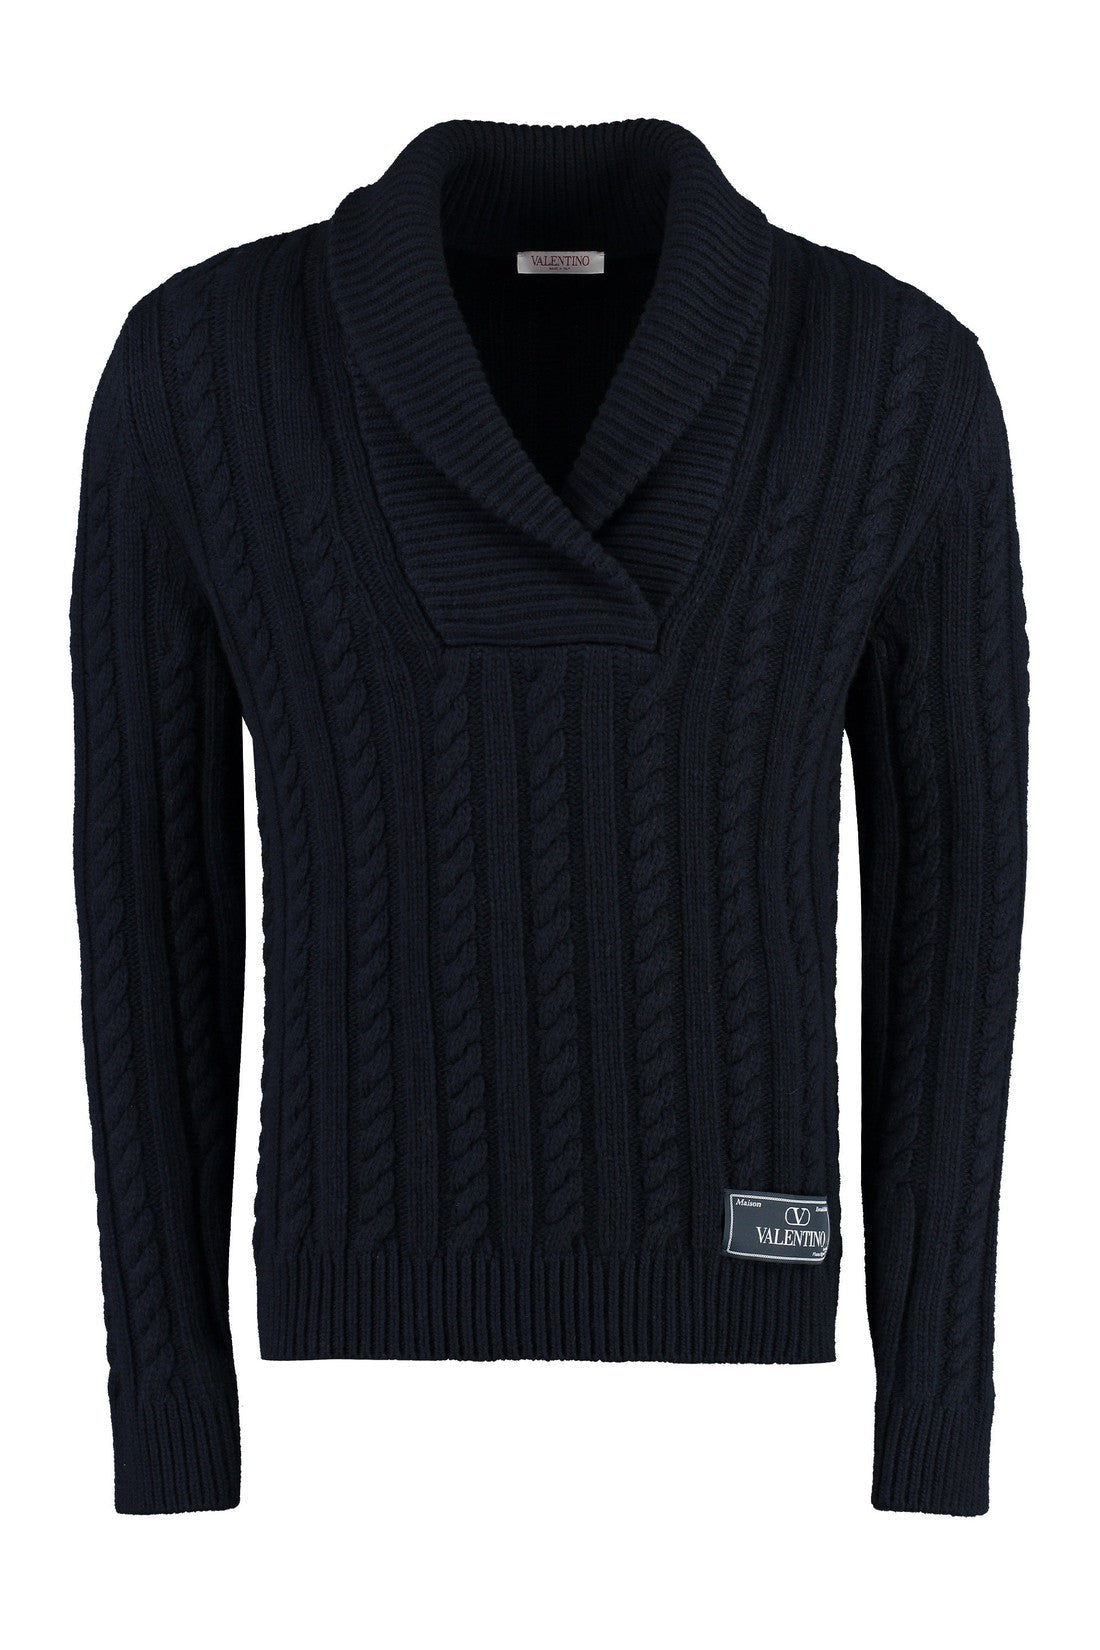 Valentino-OUTLET-SALE-Cable knit sweater-ARCHIVIST